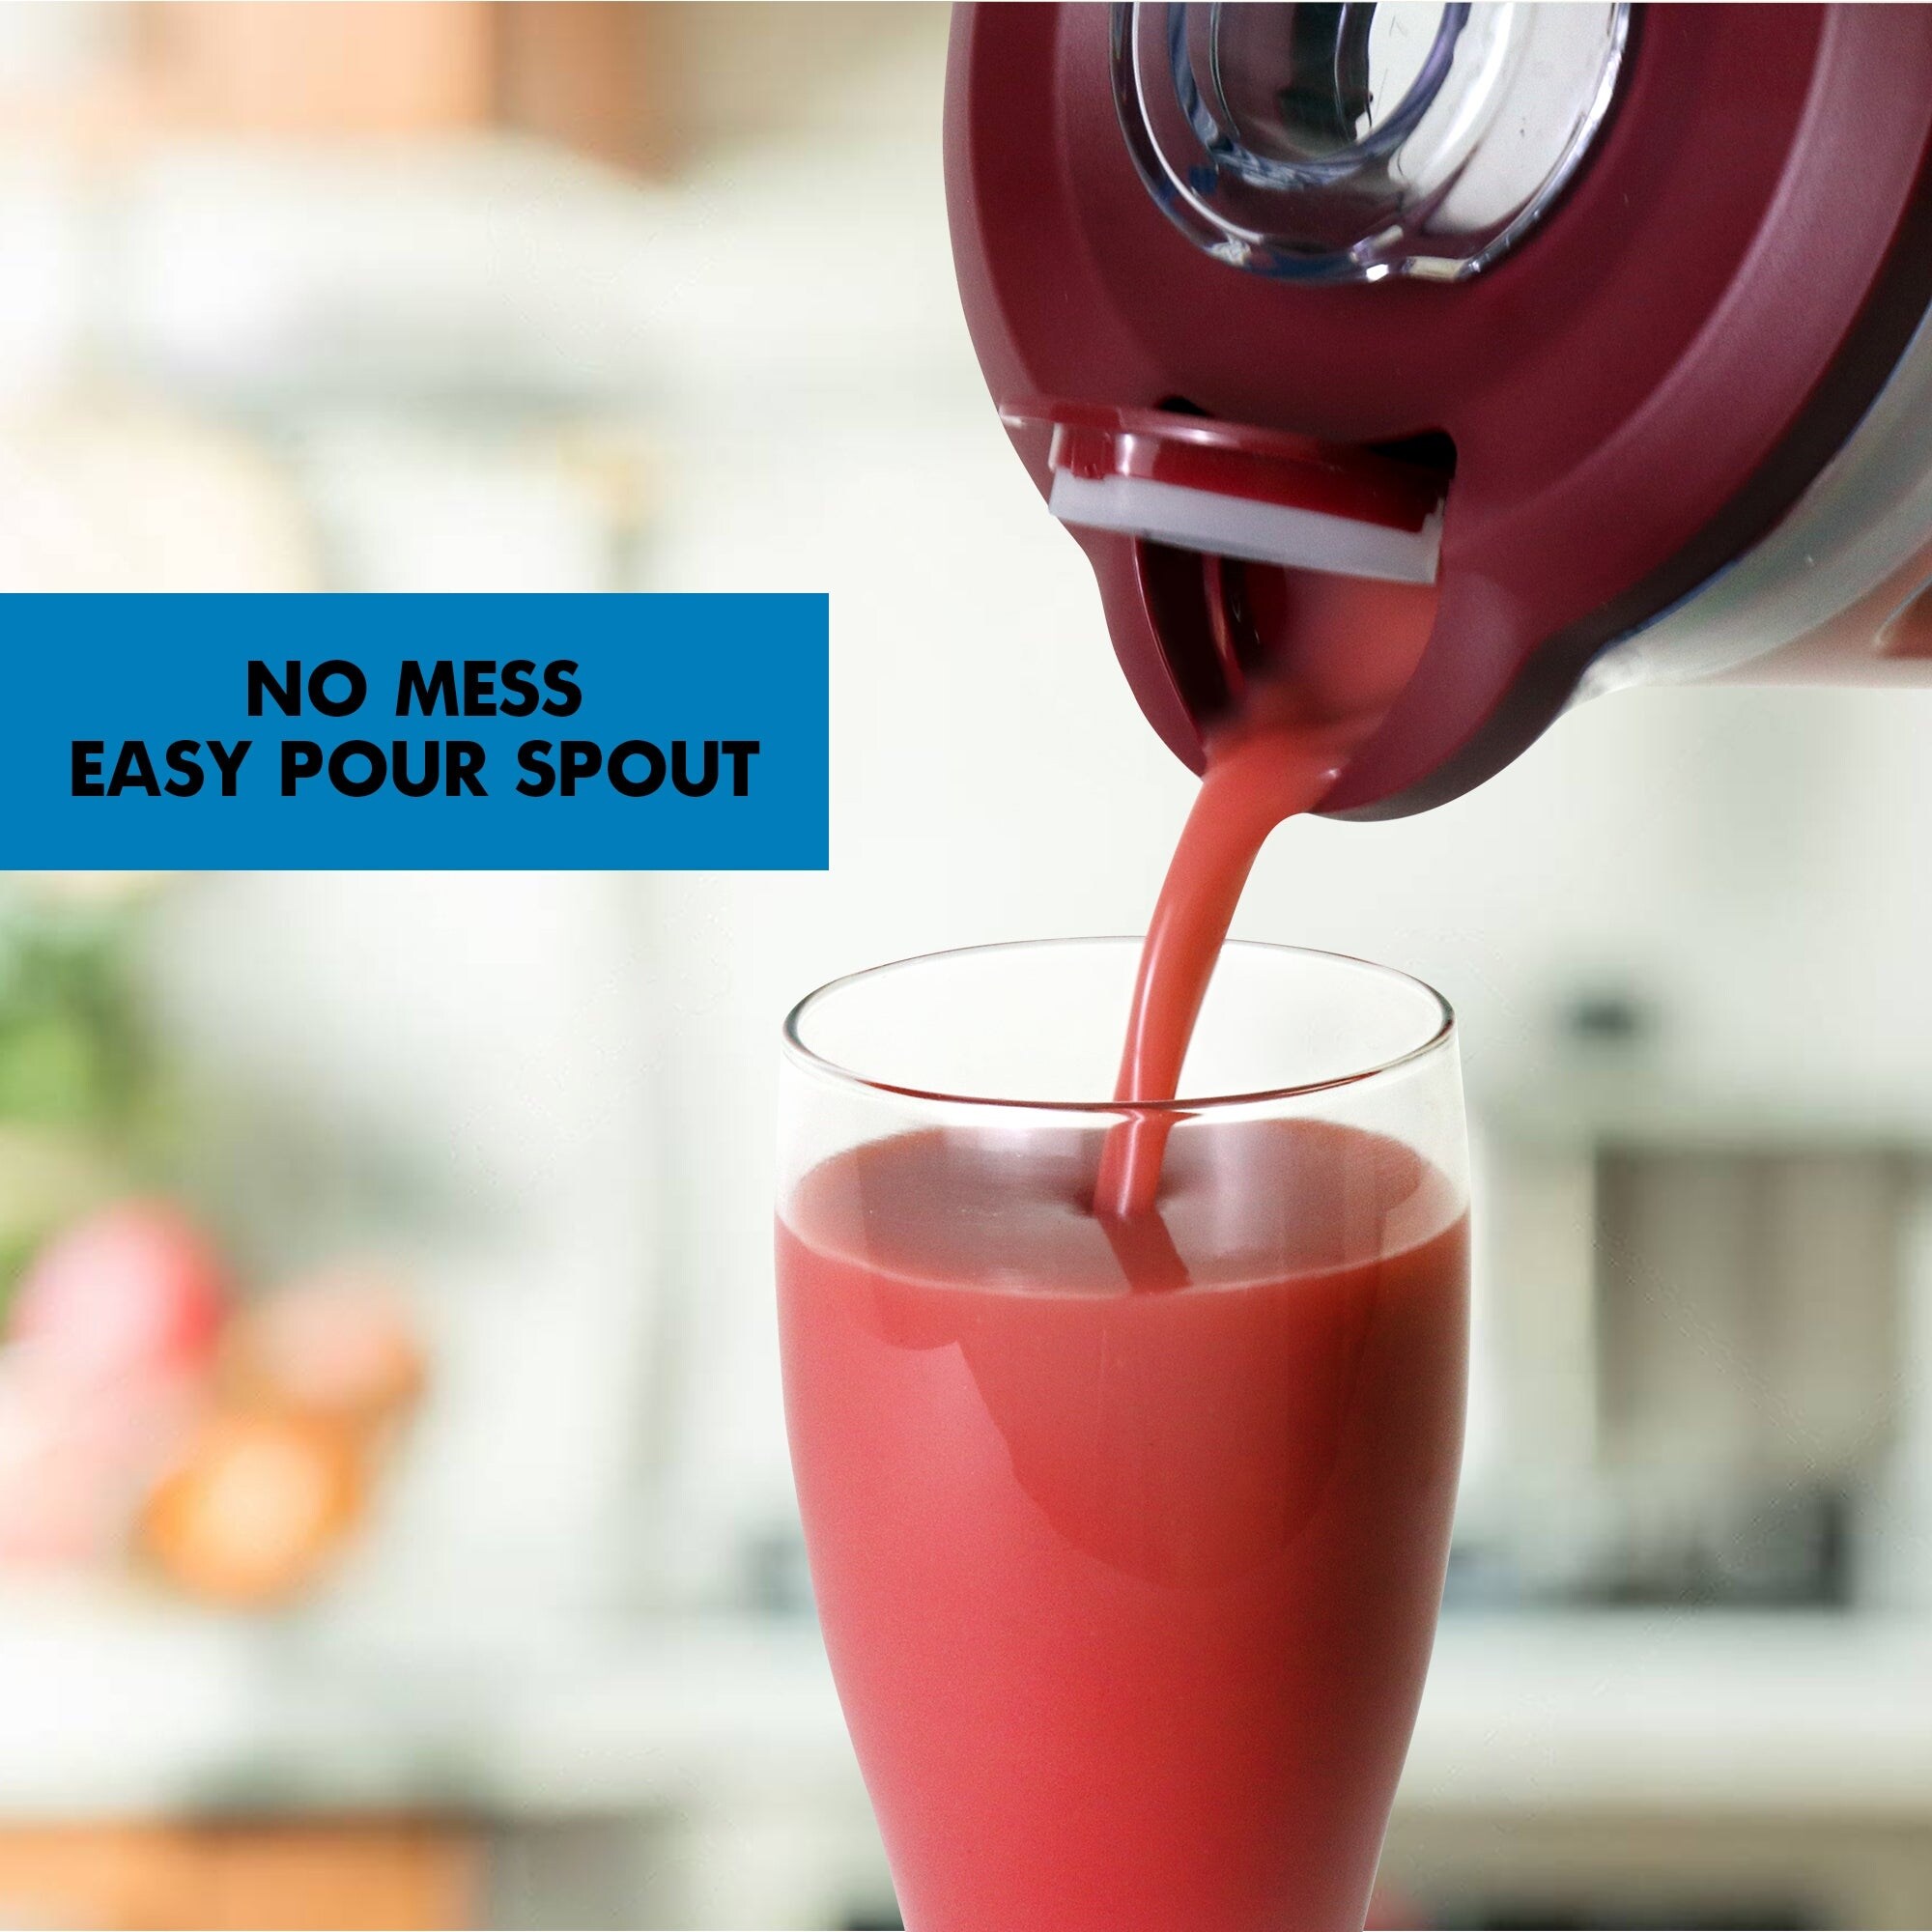 https://ak1.ostkcdn.com/images/products/is/images/direct/0c1af762dfcdd9b7e010f2a356bfadc318edd85d/Kenmore-64-oz-Stand-Blender%2C-1200W%2C-Smoothie%2C-Ice-Crush%2C-Self-Clean-Modes%2C-Variable-Speed%2C-Red.jpg